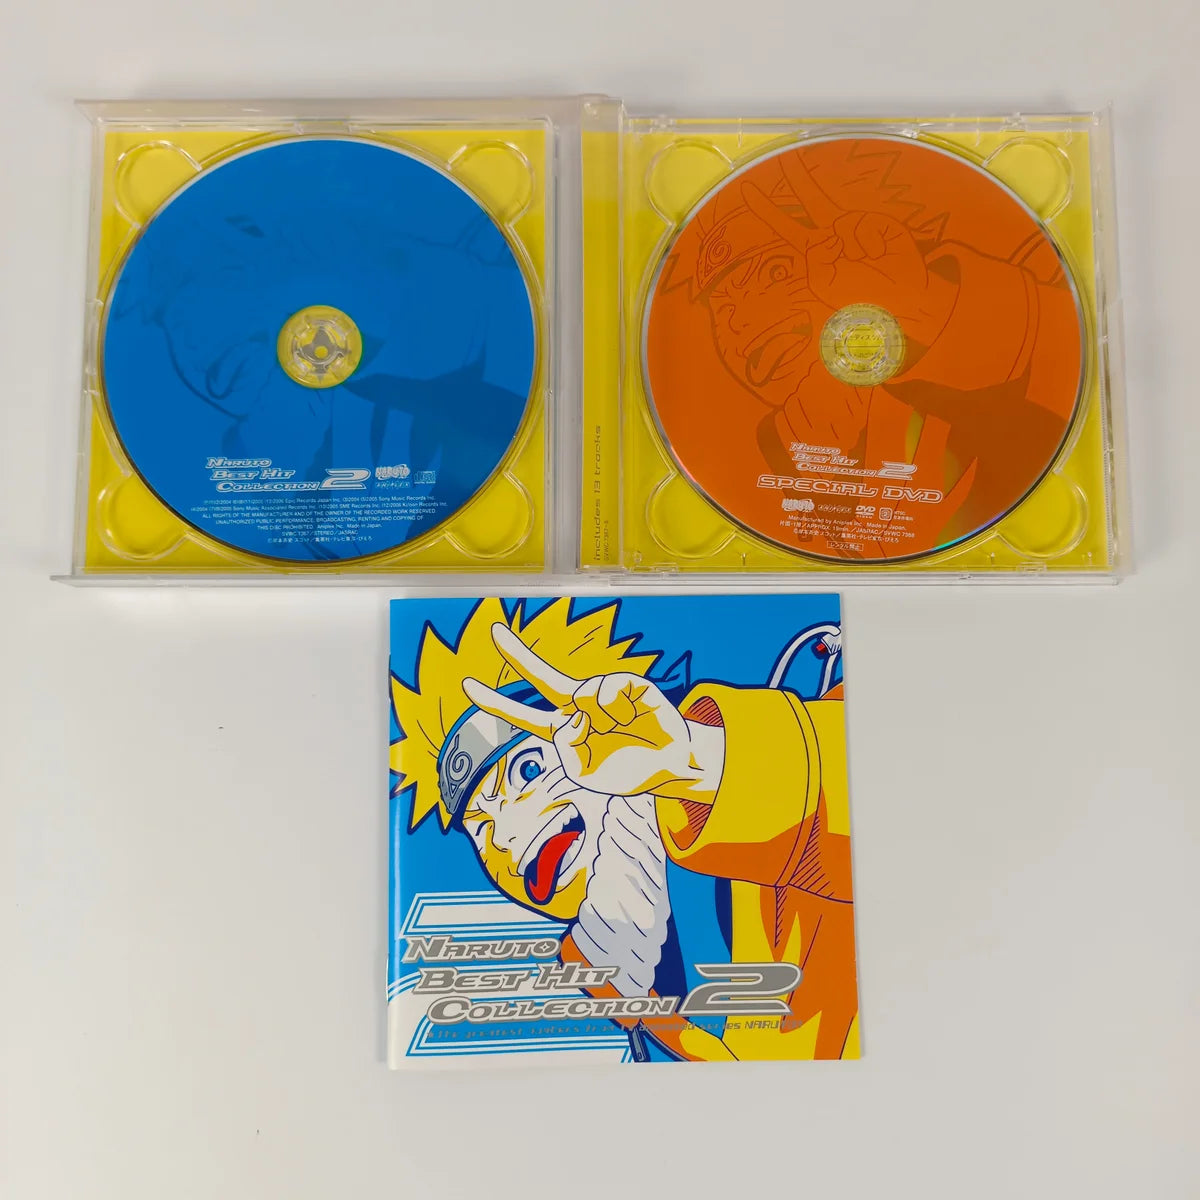 Naruto Best Hit Collection 2